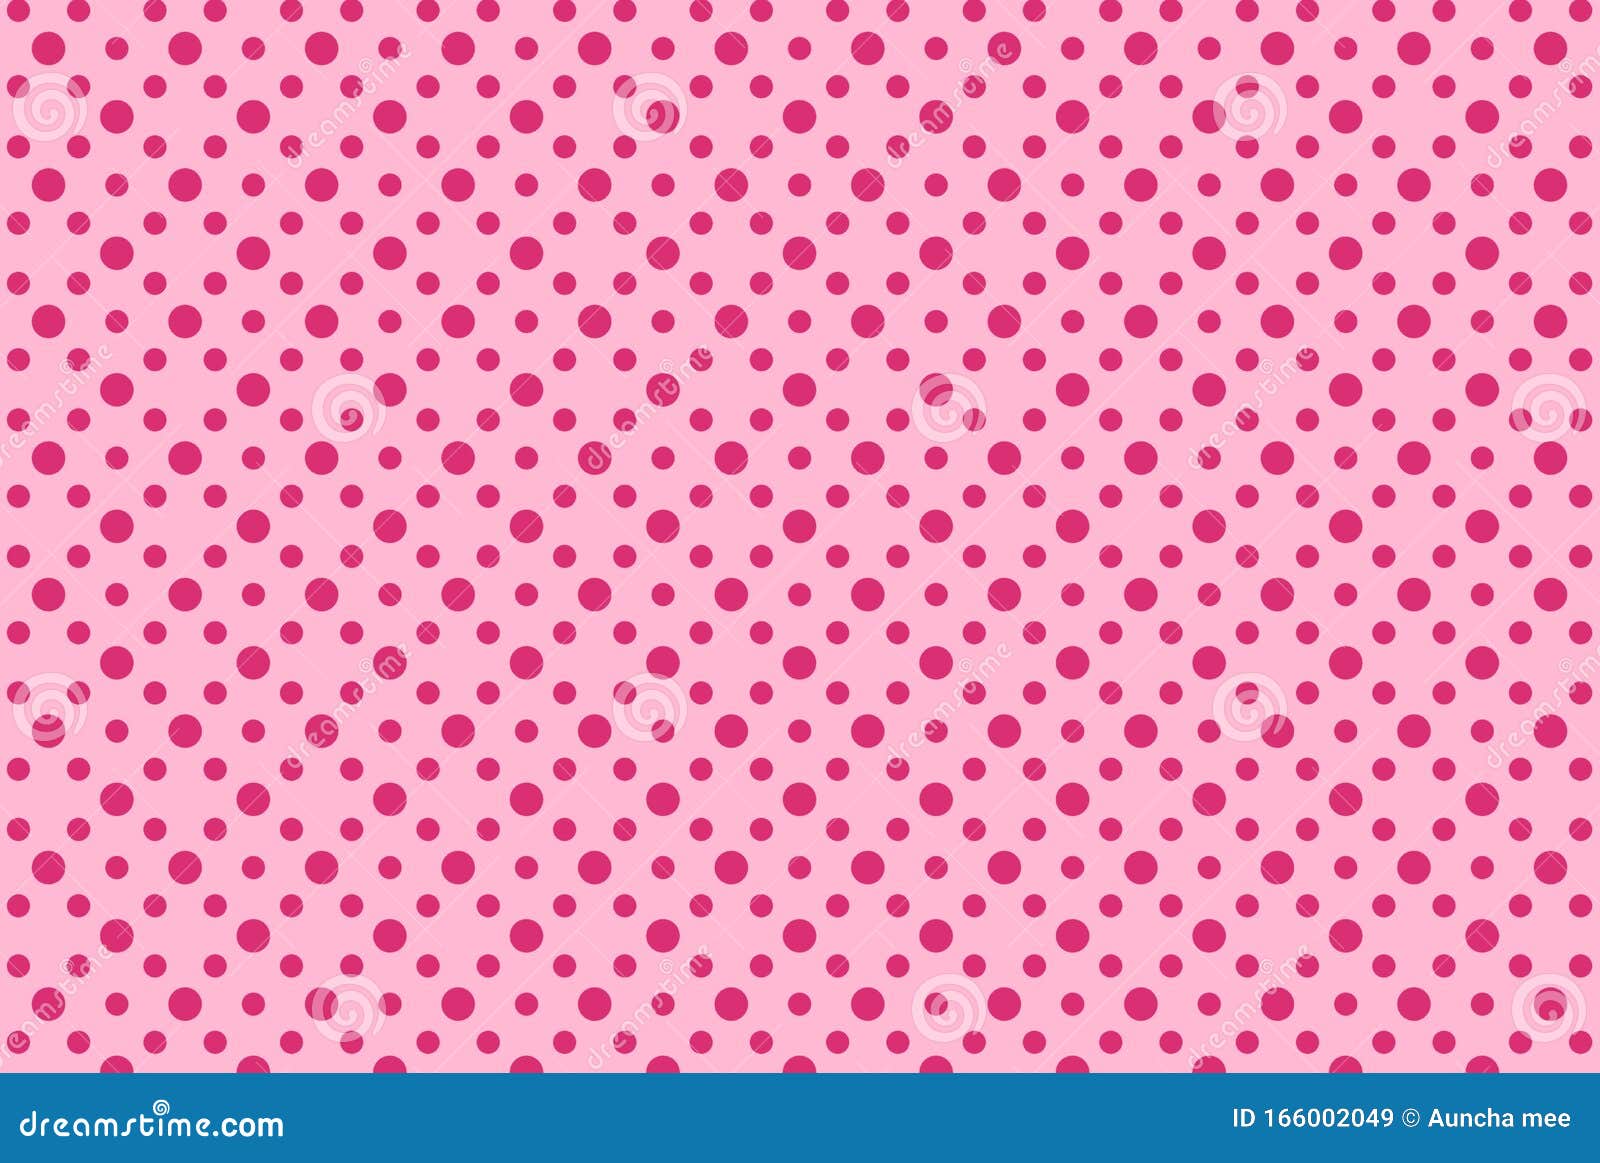 Polka Dots Seamless Pattern on Pink Background. Stock Image - Image of ...